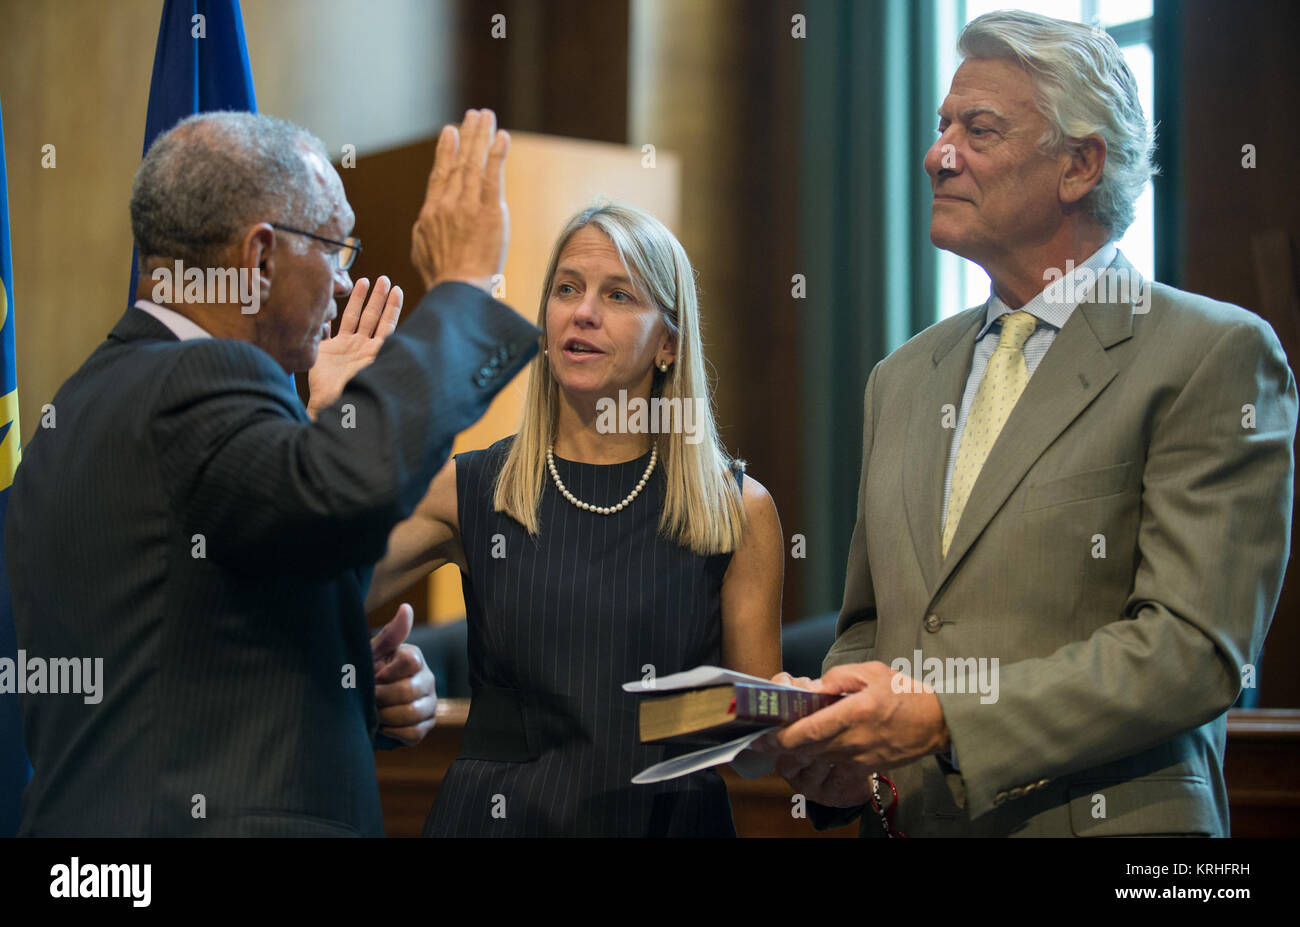 Dr. Dava J. Newman is ceremonially sworn-in as NASA Deputy Administrator by NASA Administrator Charles Bolden, as her husband, Guillermo Trotti, holds the Bible, Tuesday, July 14, 2015 at the Dirksen Senate Office Building in Washington. The event was hosted by Sen. Steve Daines, R-Mont., and Sen. Jon Tester, D-Mont.  Photo Credit: (NASA/Joel Kowsky) Dr. Dava J. Newman Ceremonial Swearing-In (201507140018HQ) Stock Photo